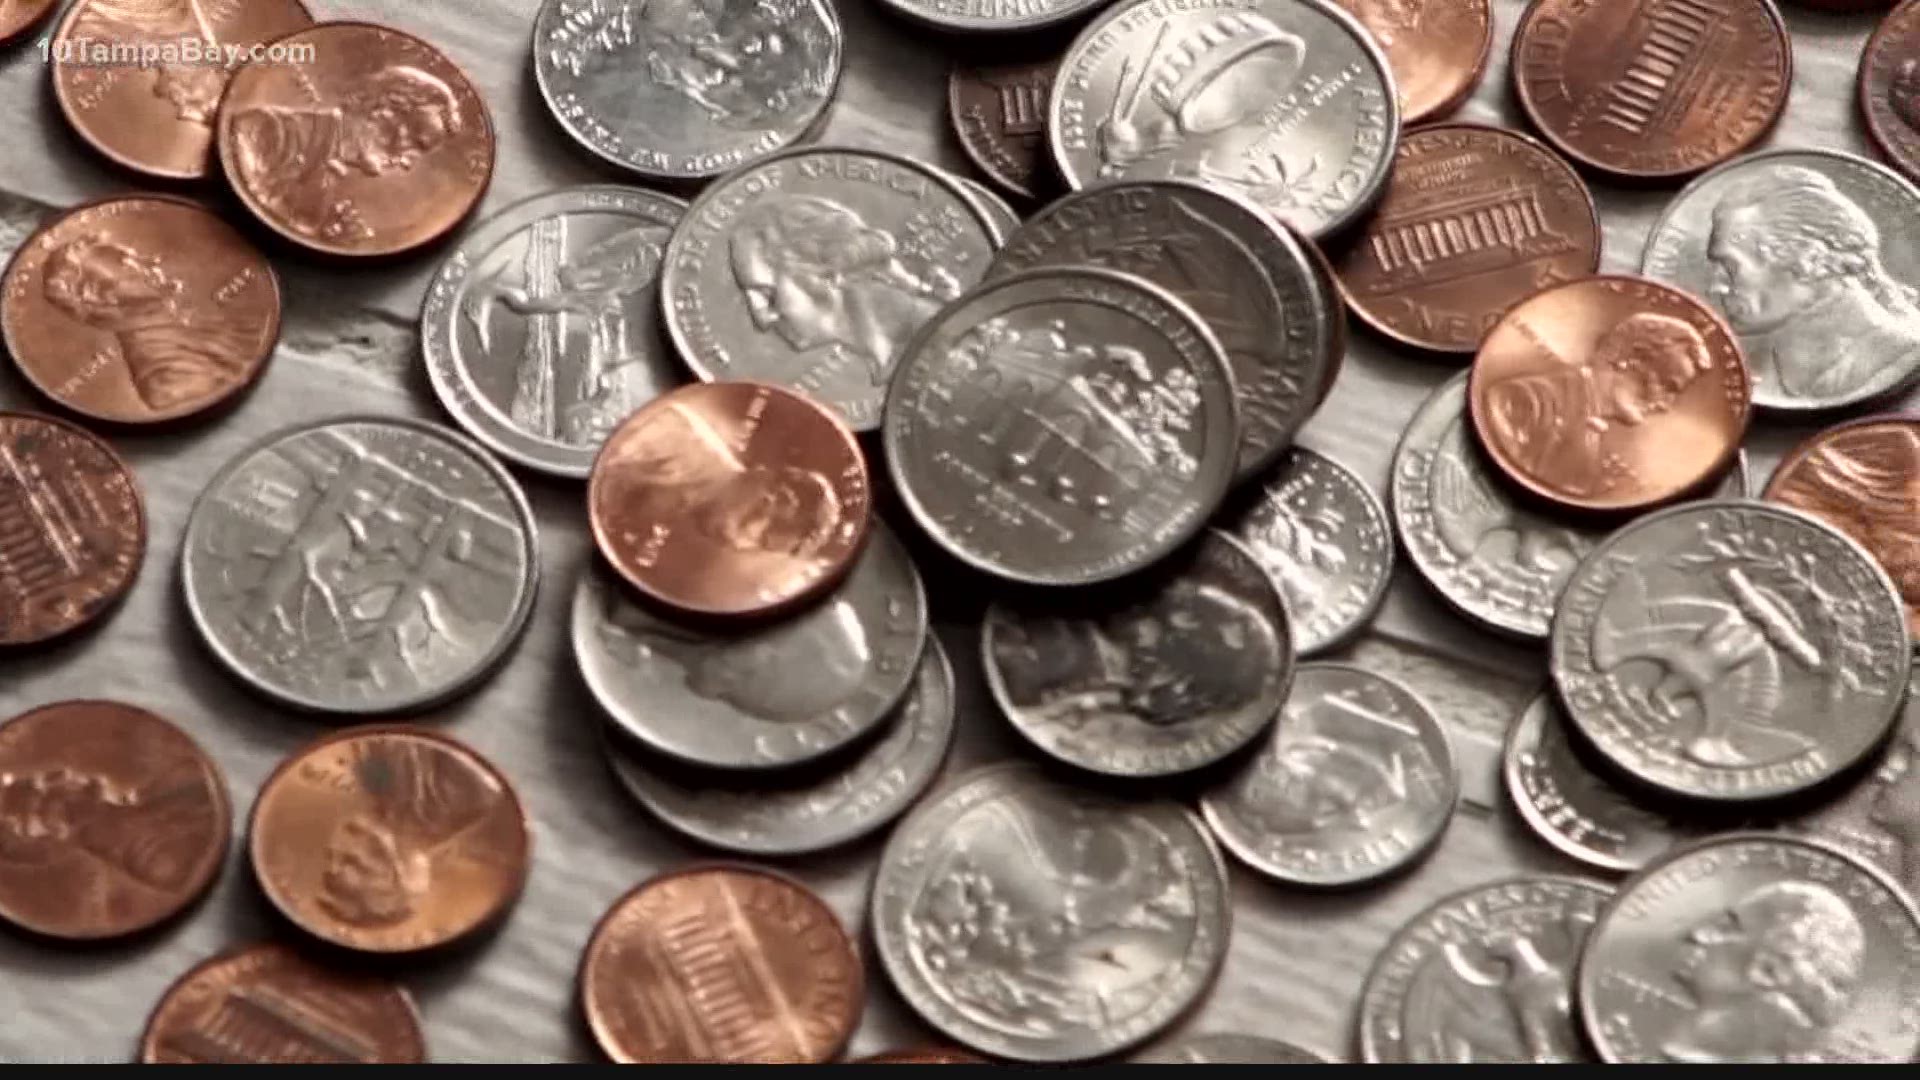 The Federal Reserve announced a coin shortage in June because of the pandemic.